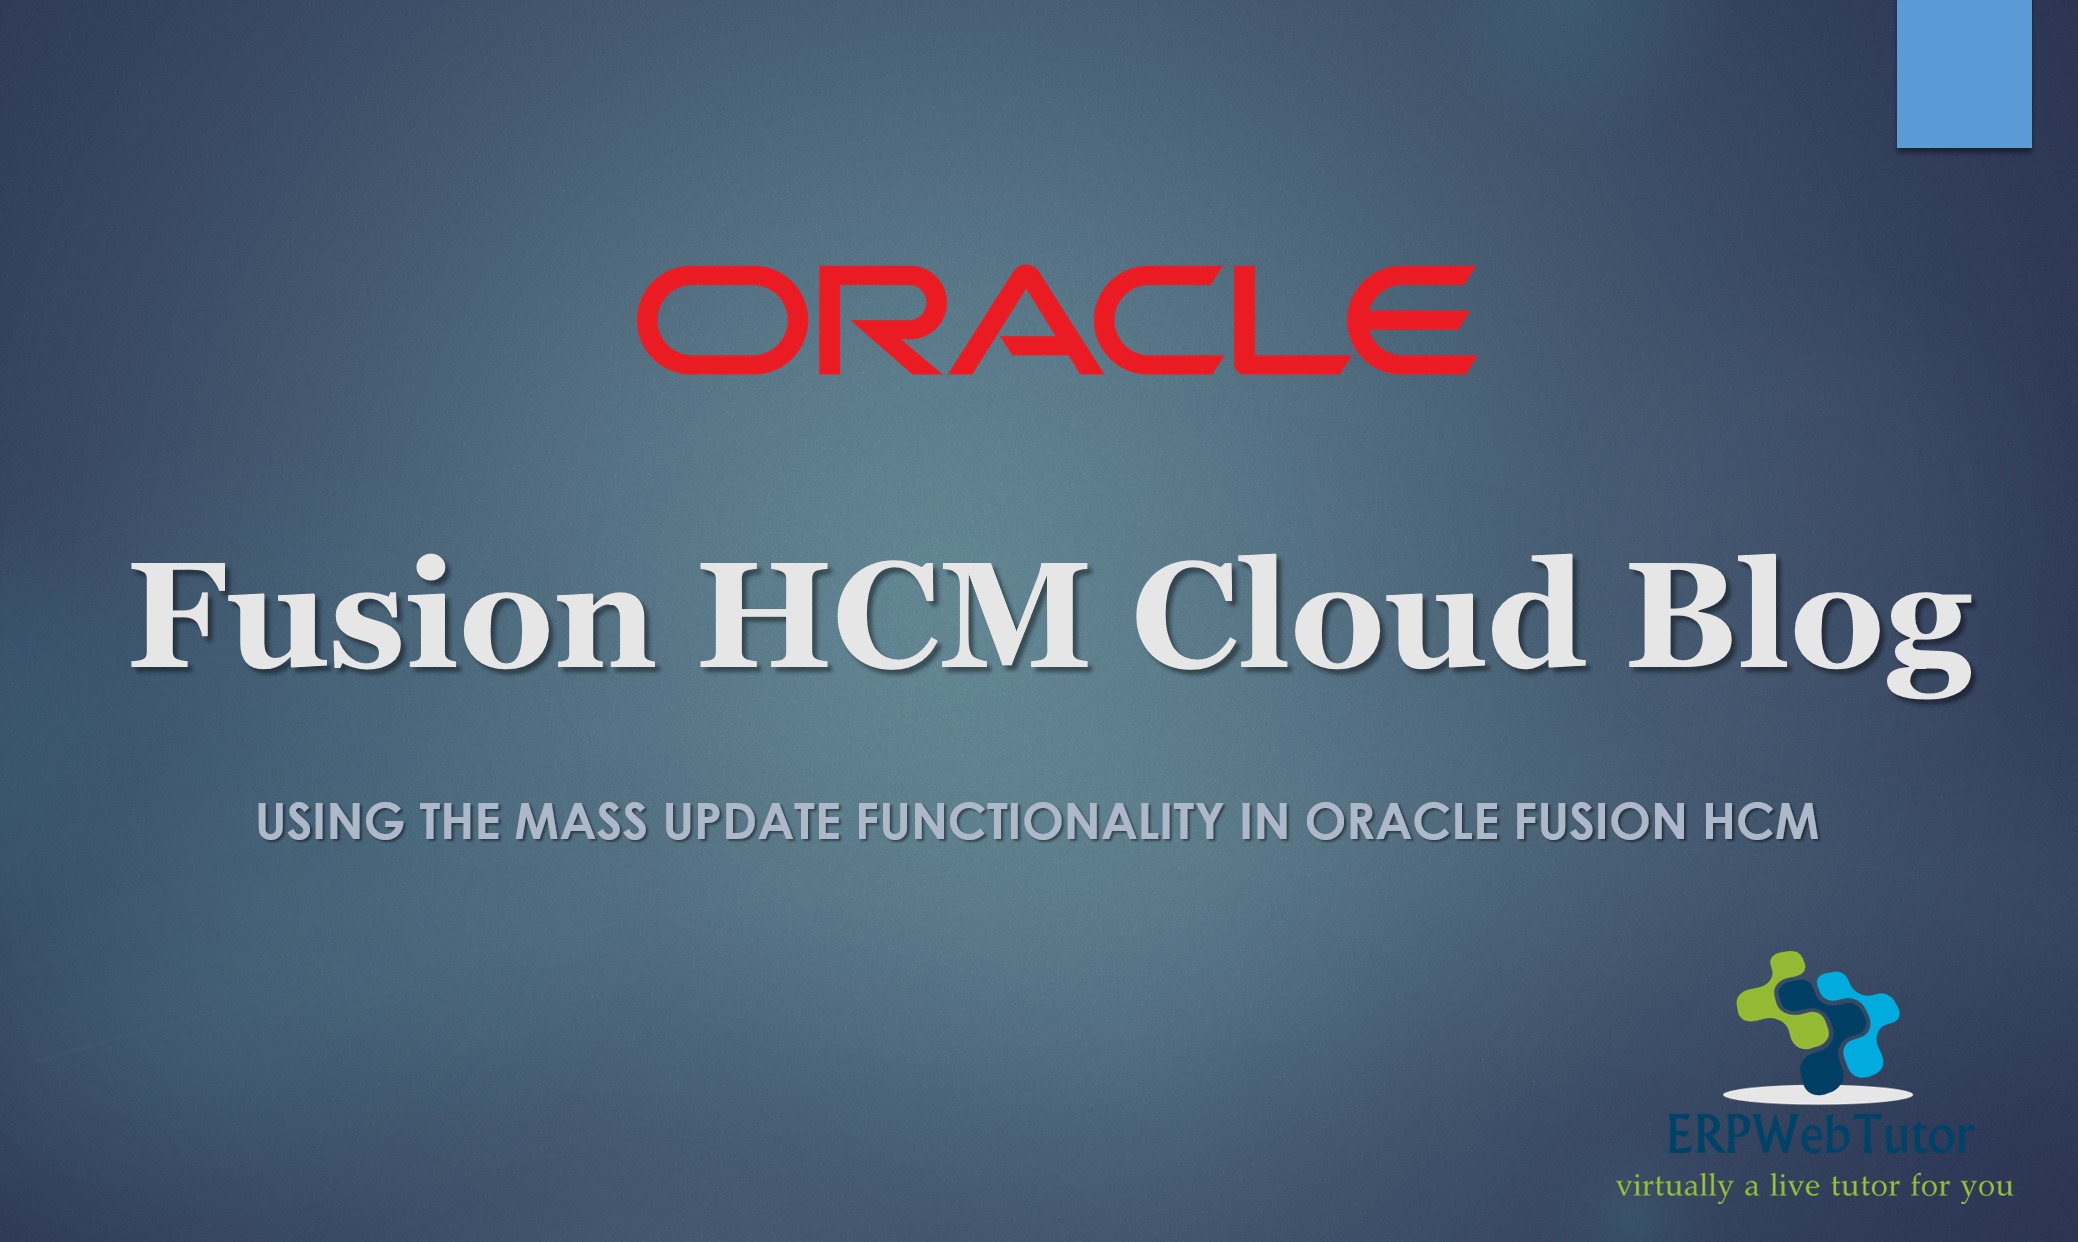 Using the Mass Update Functionality in Oracle Fusion HCM